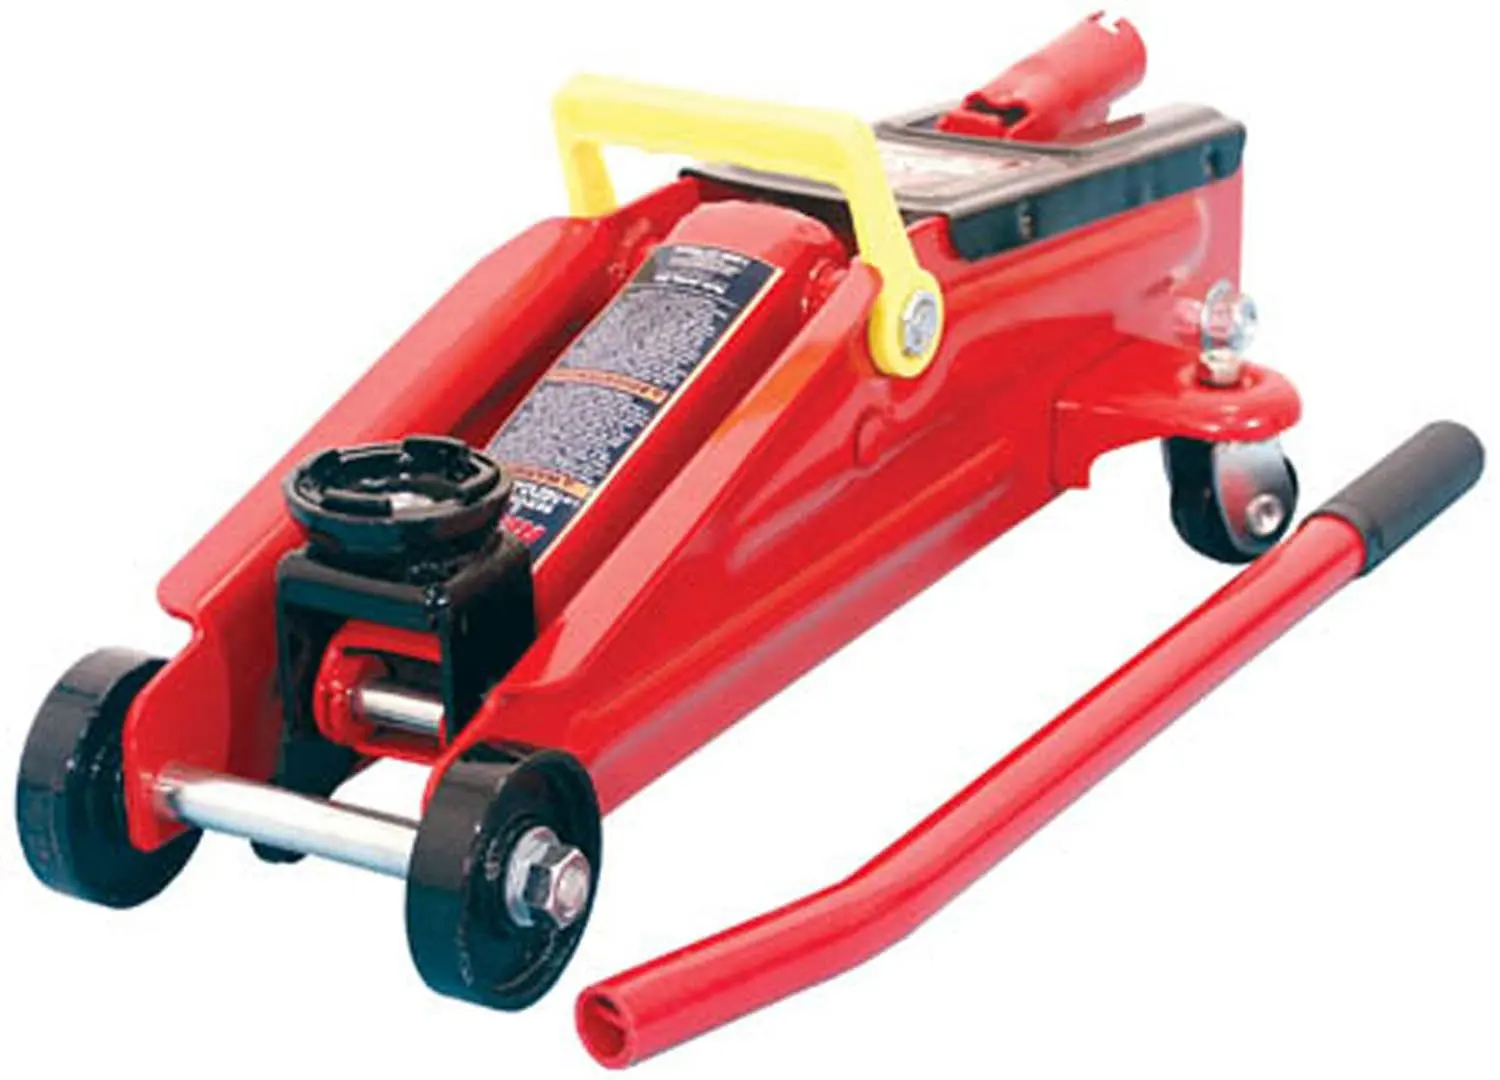 Torin Big Red Hydraulic Trolley Floor Jack Combo With 2 Jack